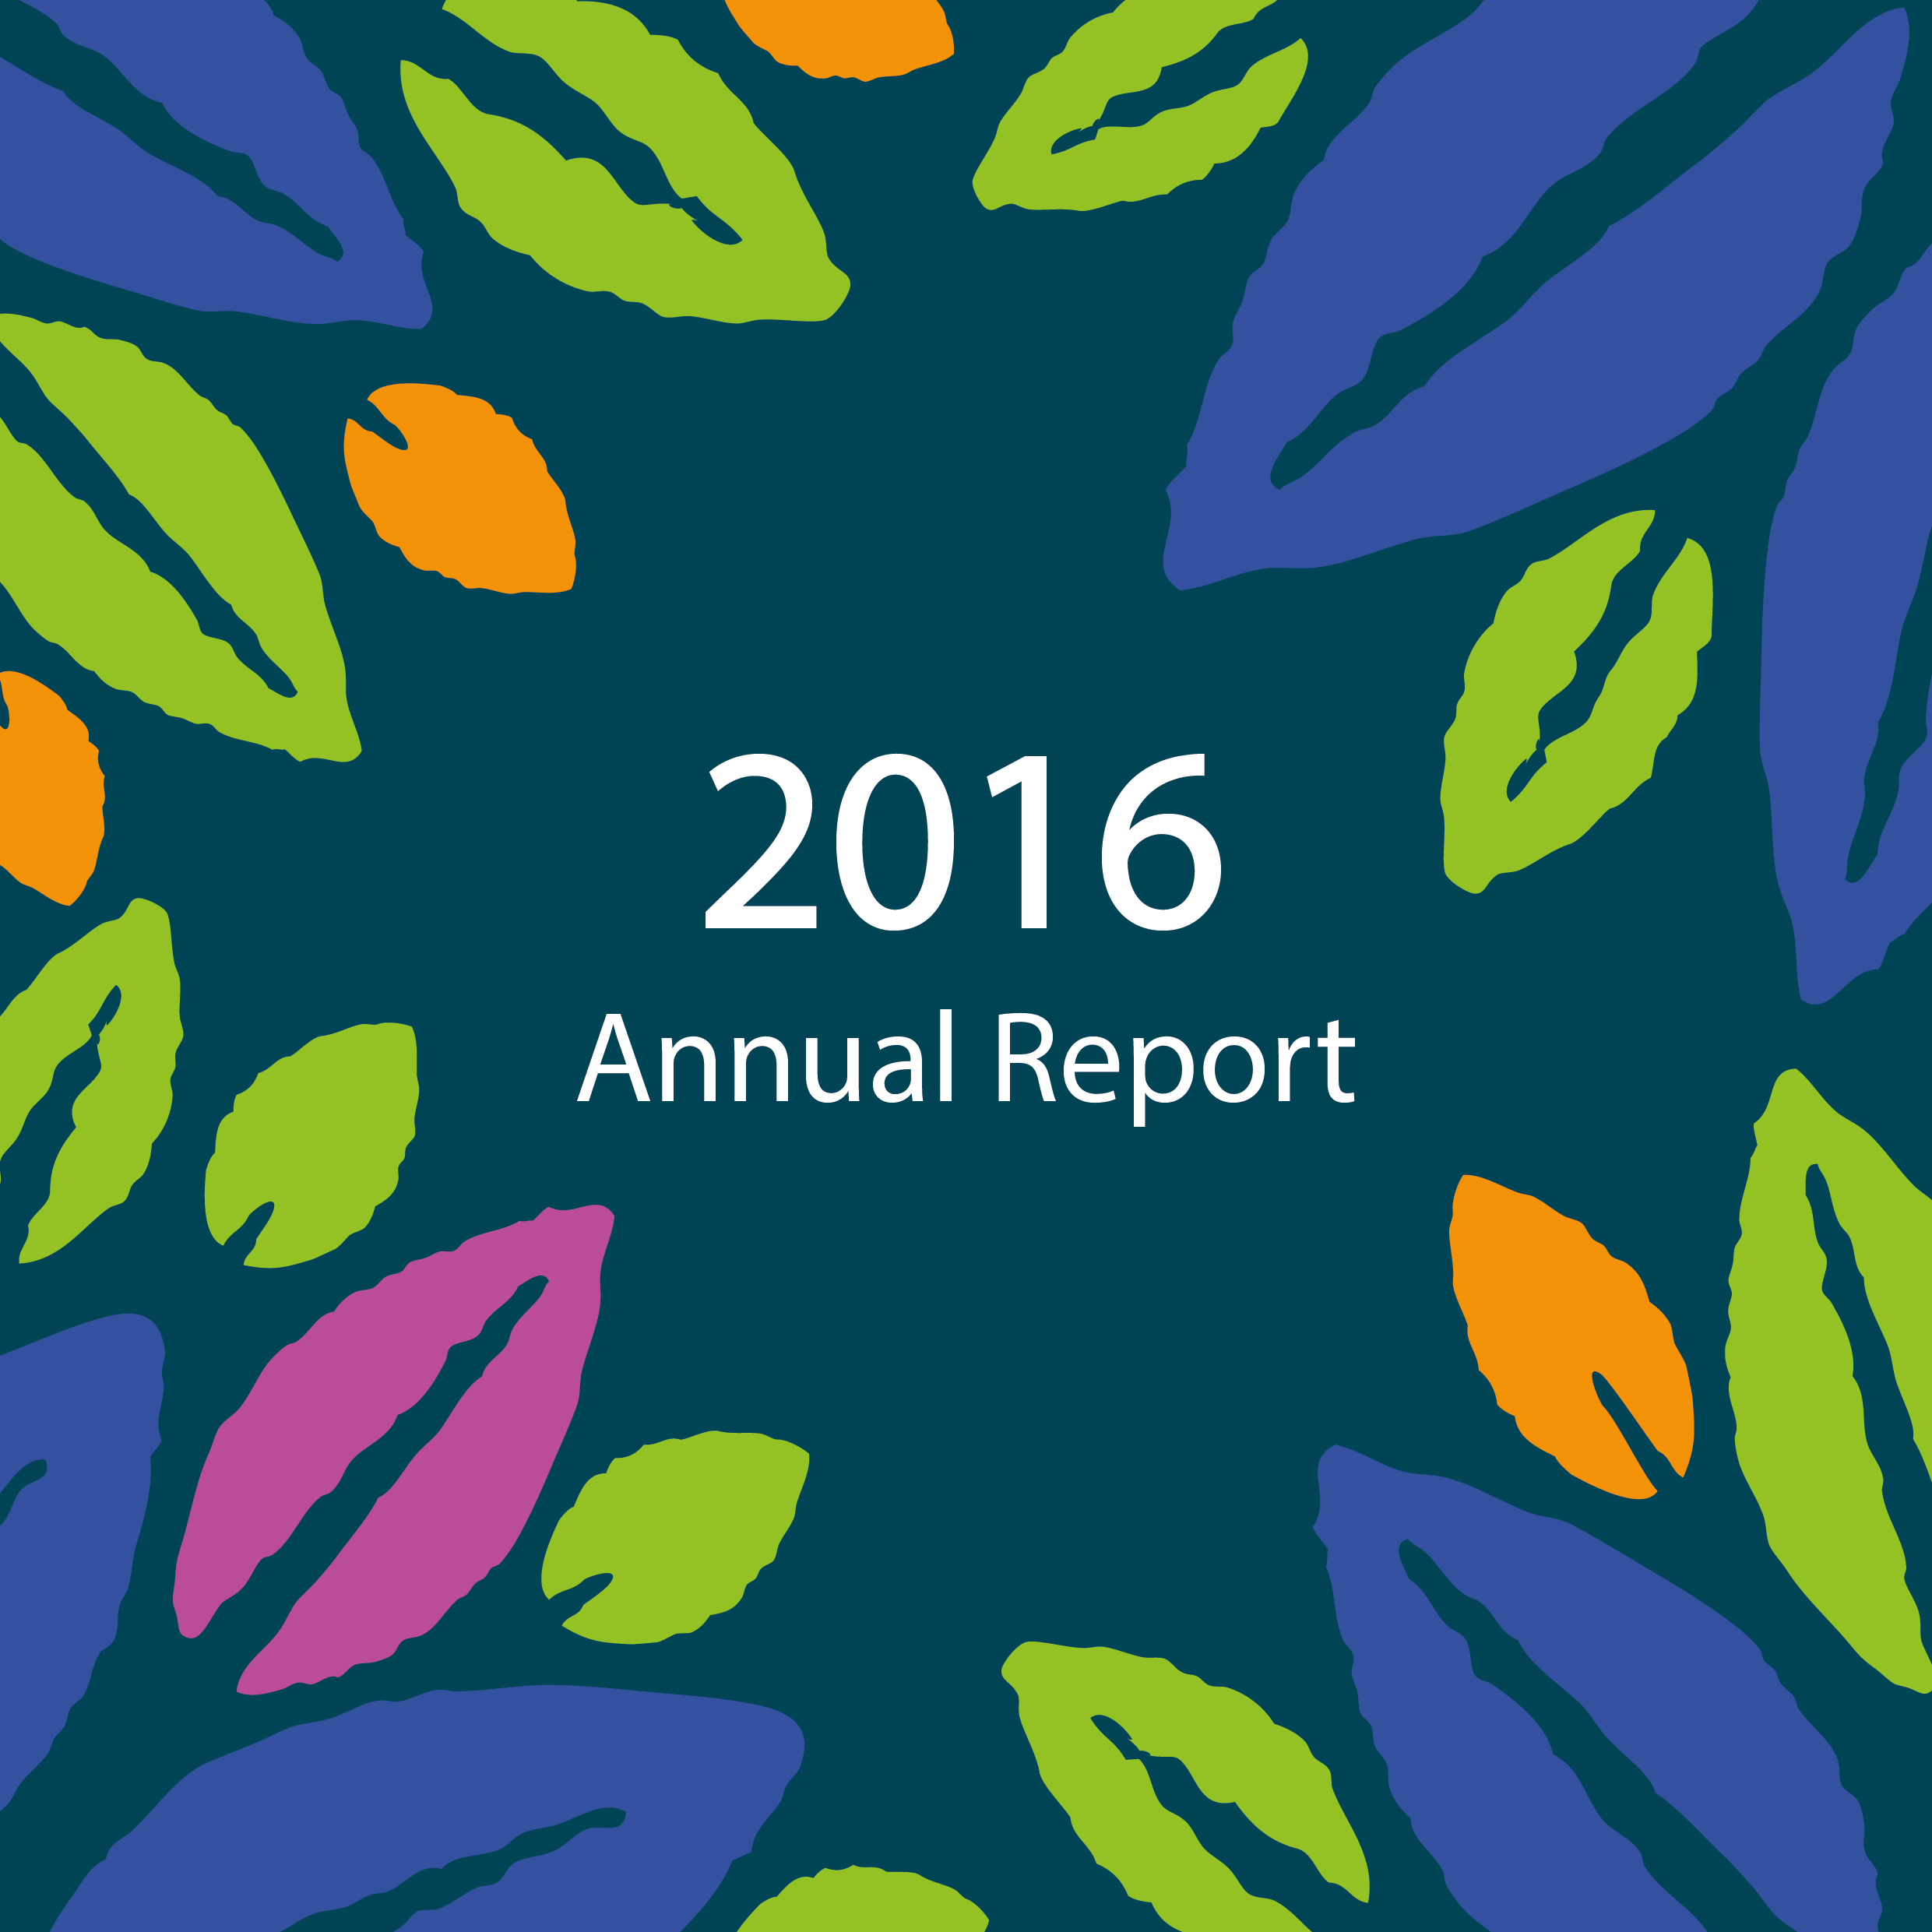 Annual report 2016-01.png